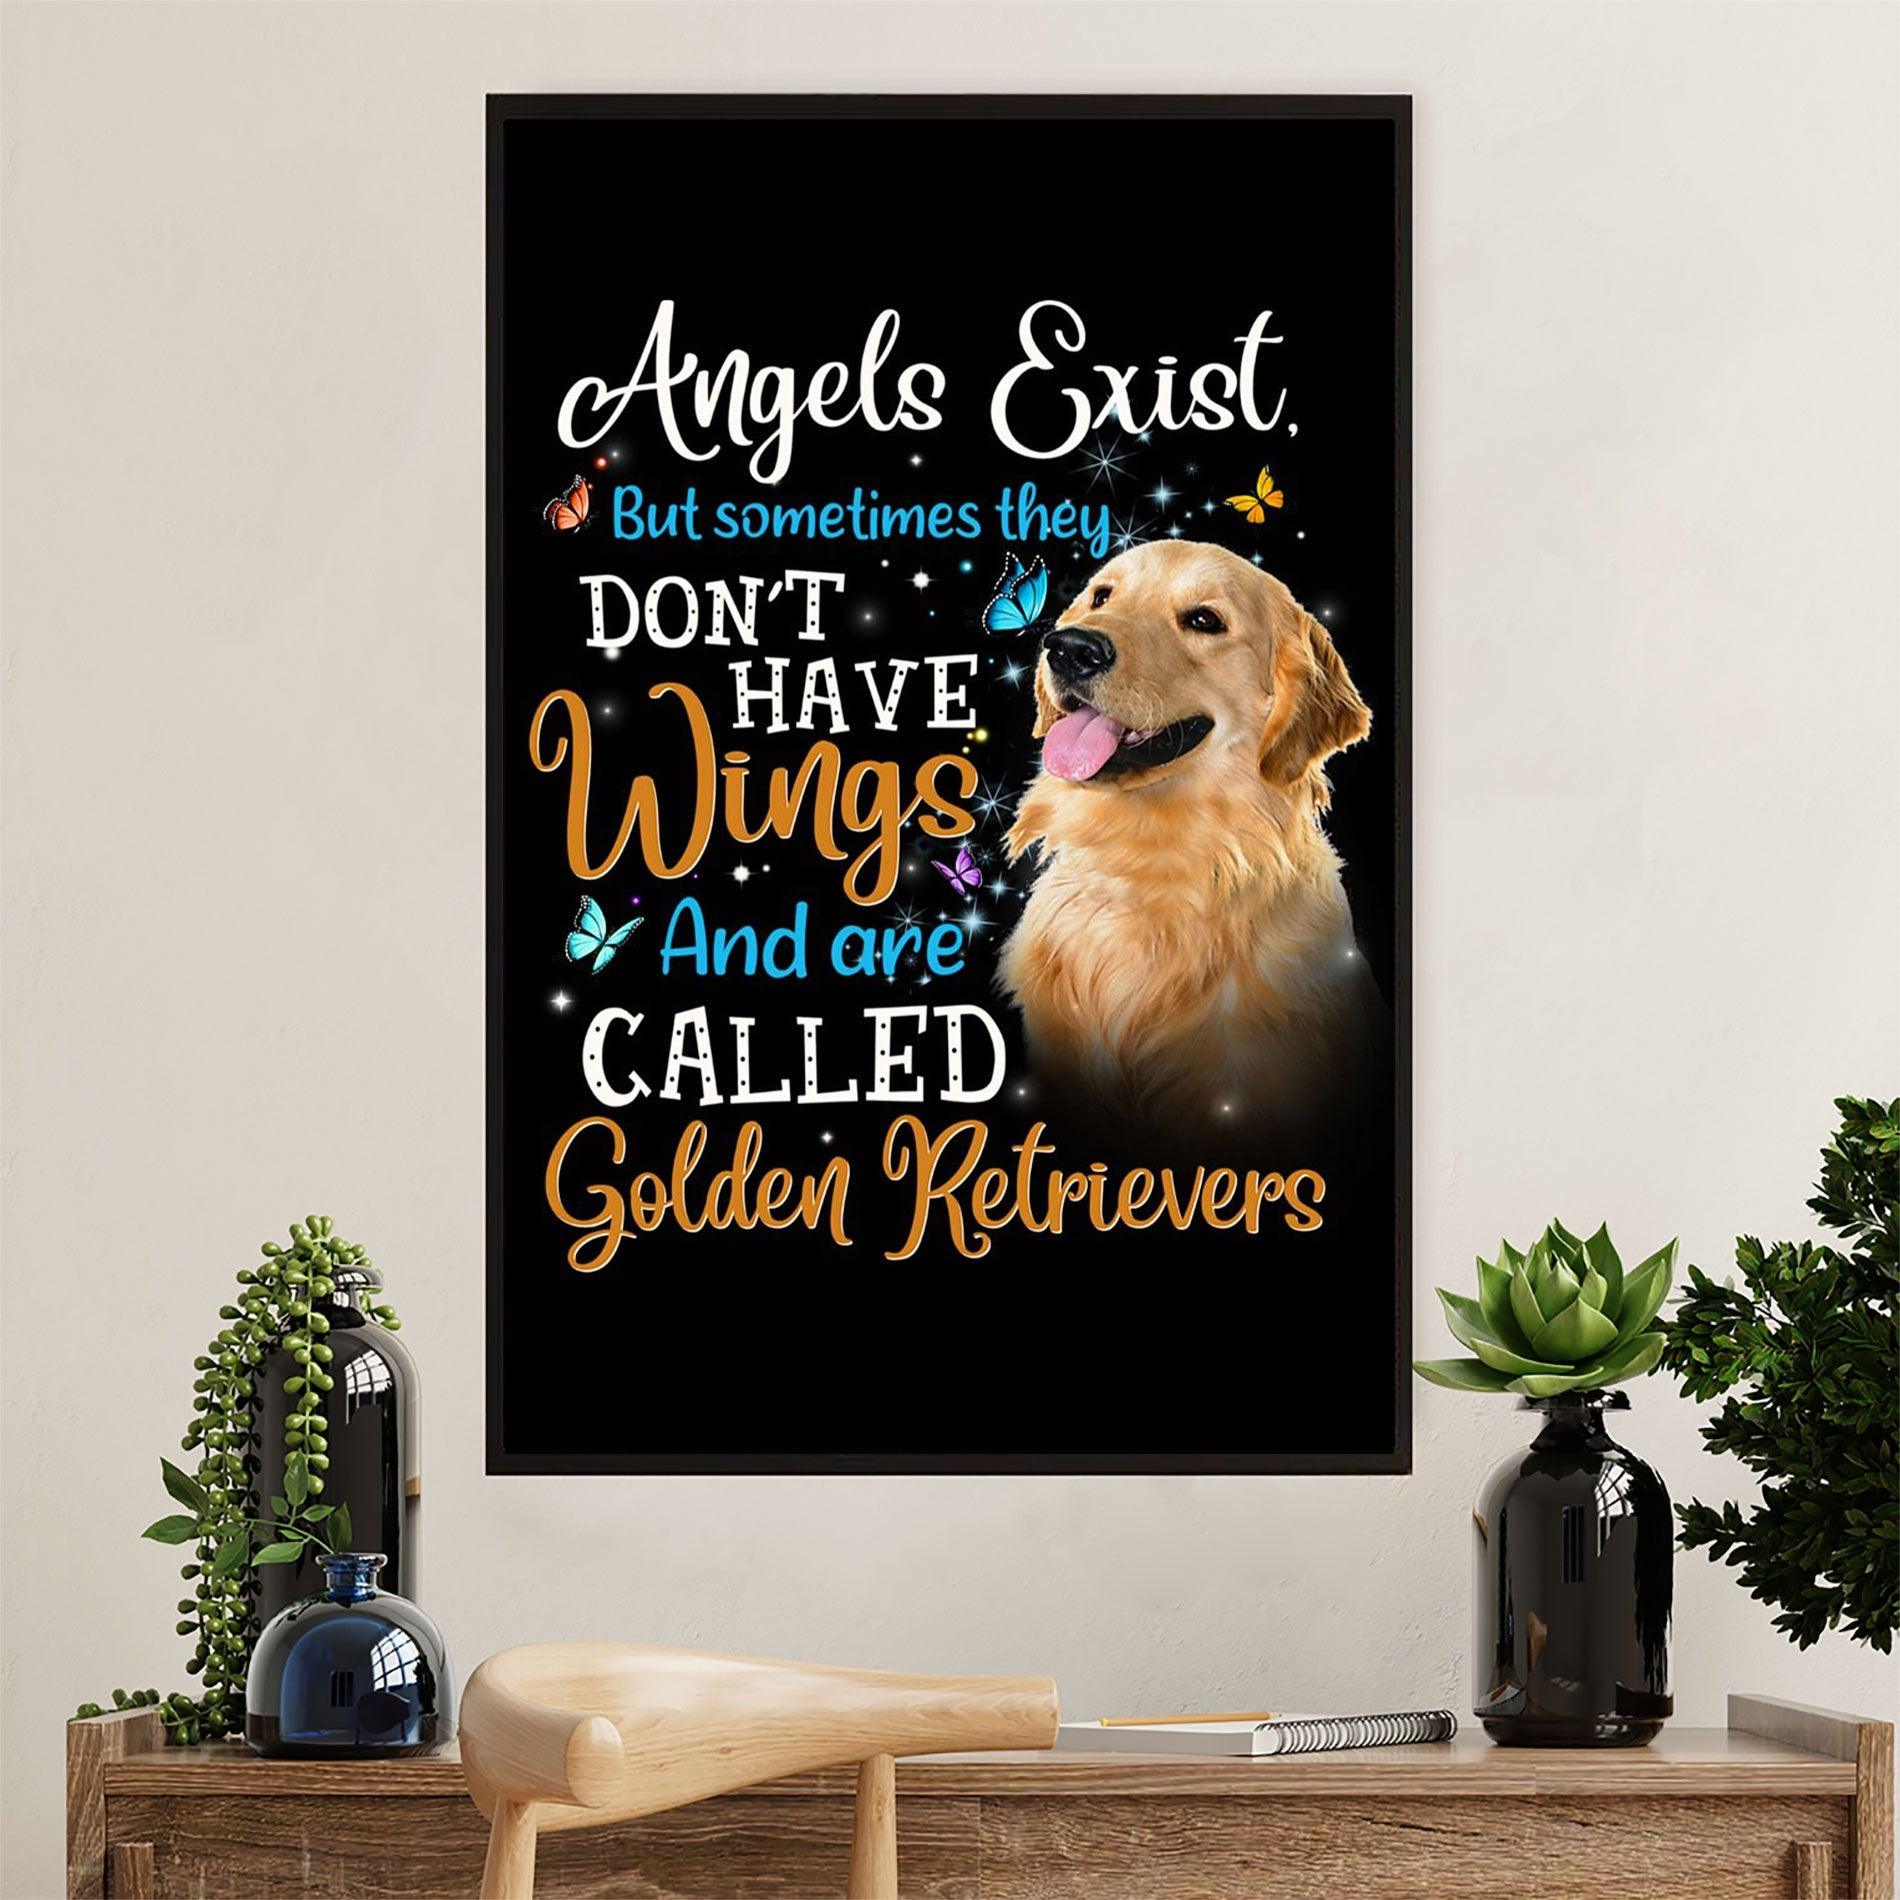 Golden Retriever Portrait Canvas, Angels Exist, But Sometimes They Don't Have Wings And Are Called Golden Retrievers Portrait Canvas - Perfect Gift For Dog Lovers - Amzanimalsgift